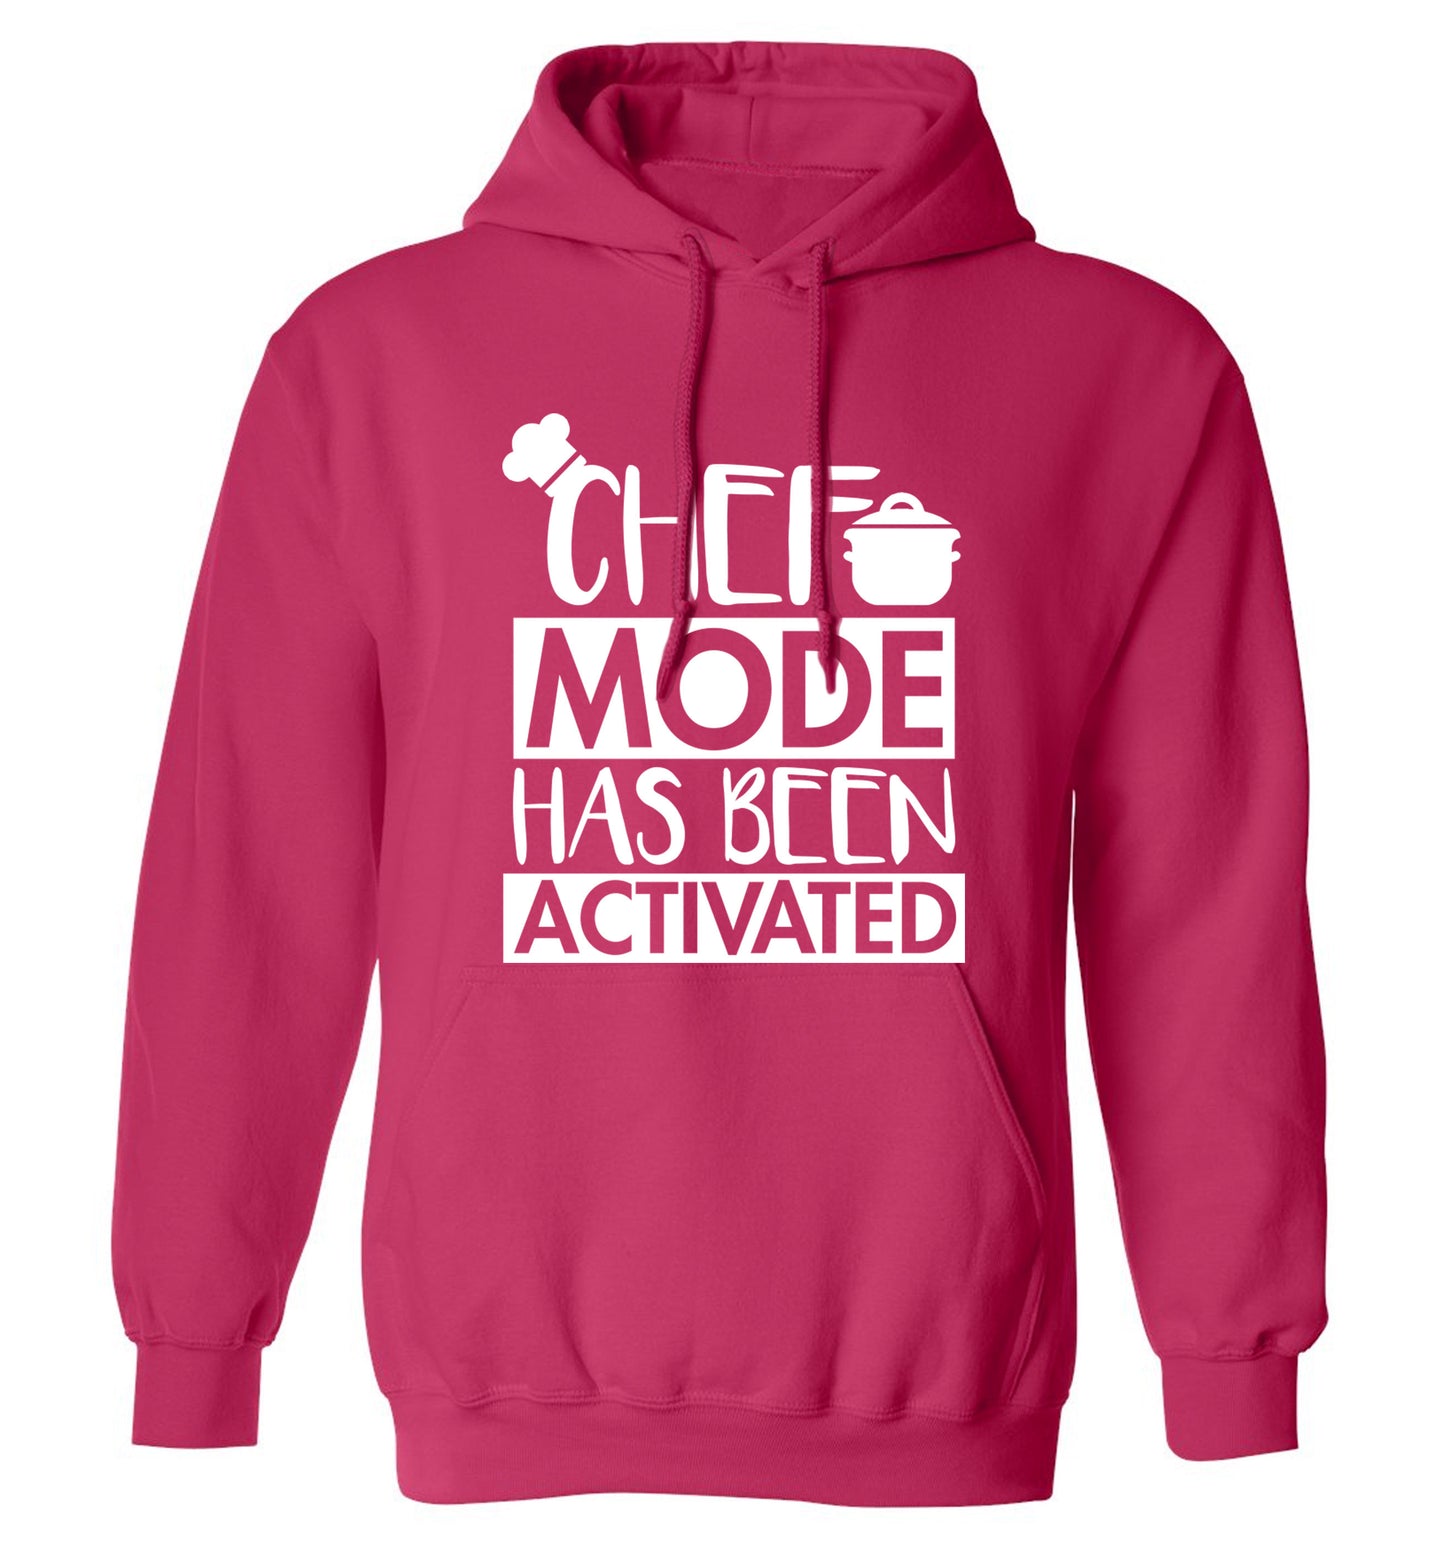 Chef mode has been activated adults unisex pink hoodie 2XL